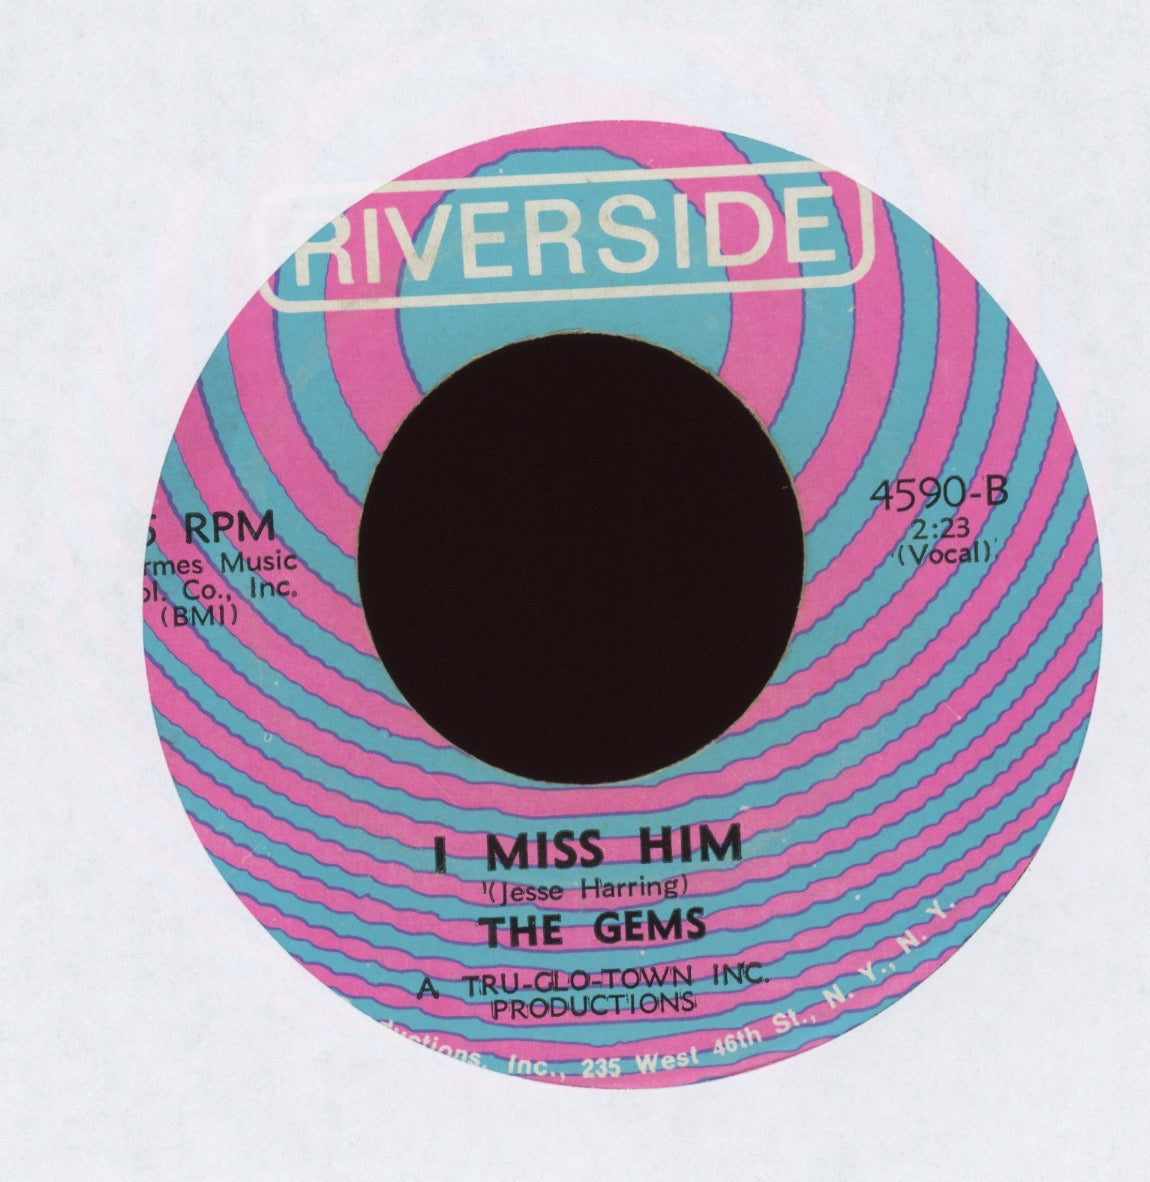 The Gems - I'll Be There on Popside Northern Soul 45